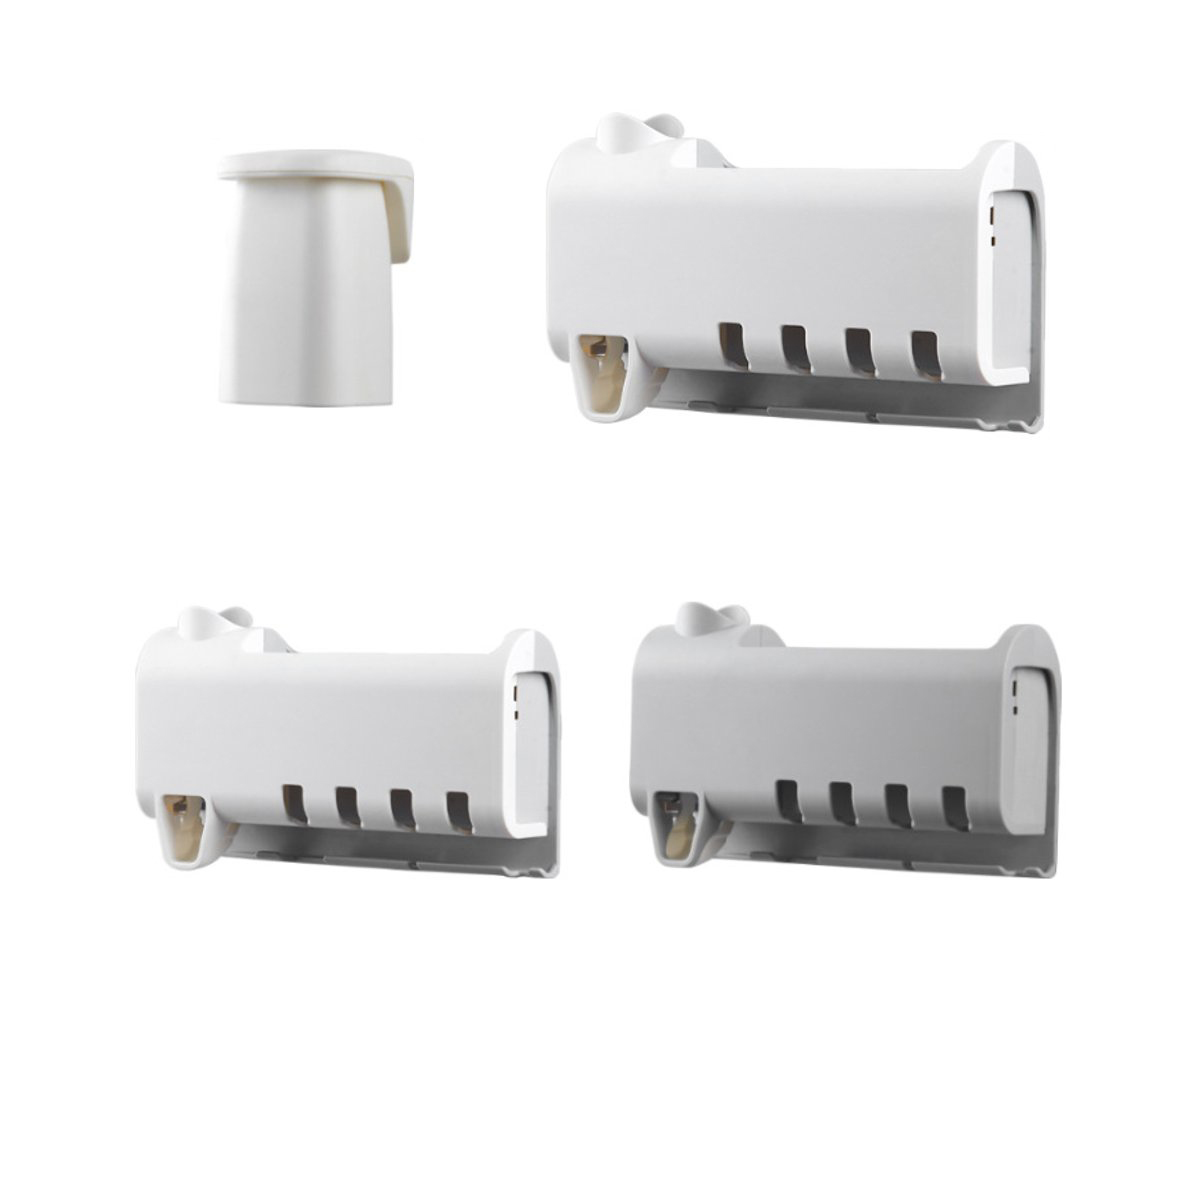 

Automatic Toothpaste Dispenser 4 Toothbrush Holder Set No Punching Wall Mount Storage Rack